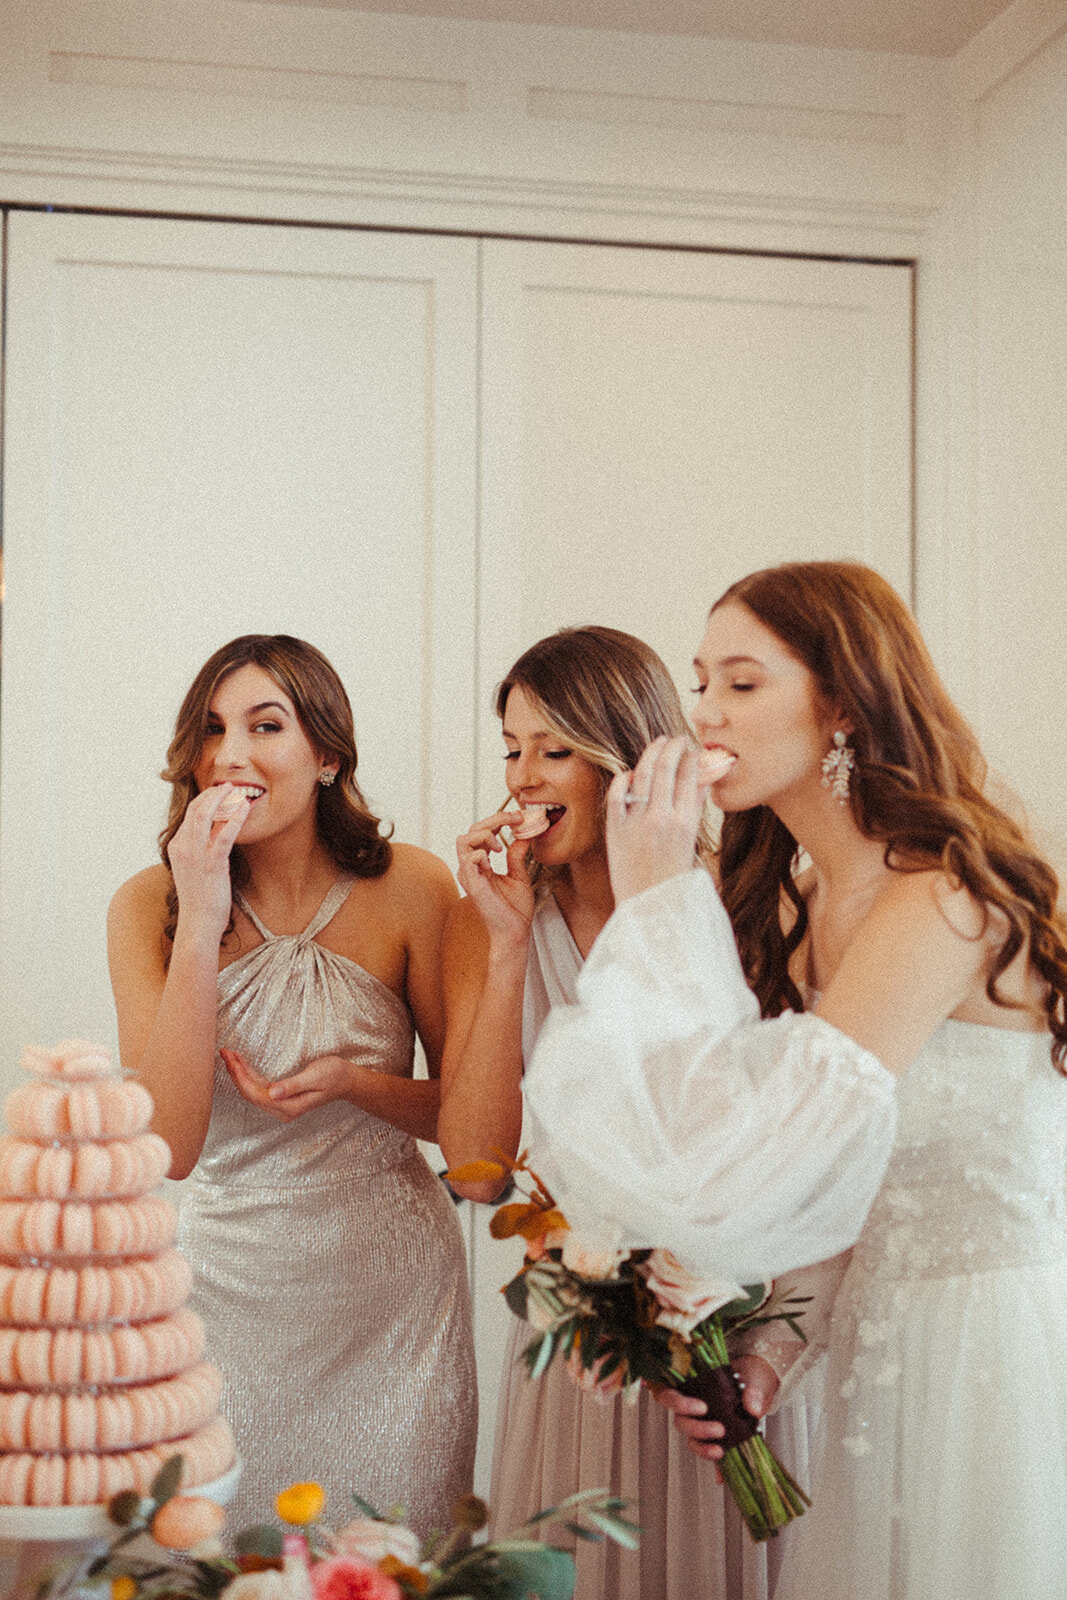 A bride wearing a white wedding gown and two women in dresses enjoy a bite of pastries beside a tower of peach-colored macaroons.